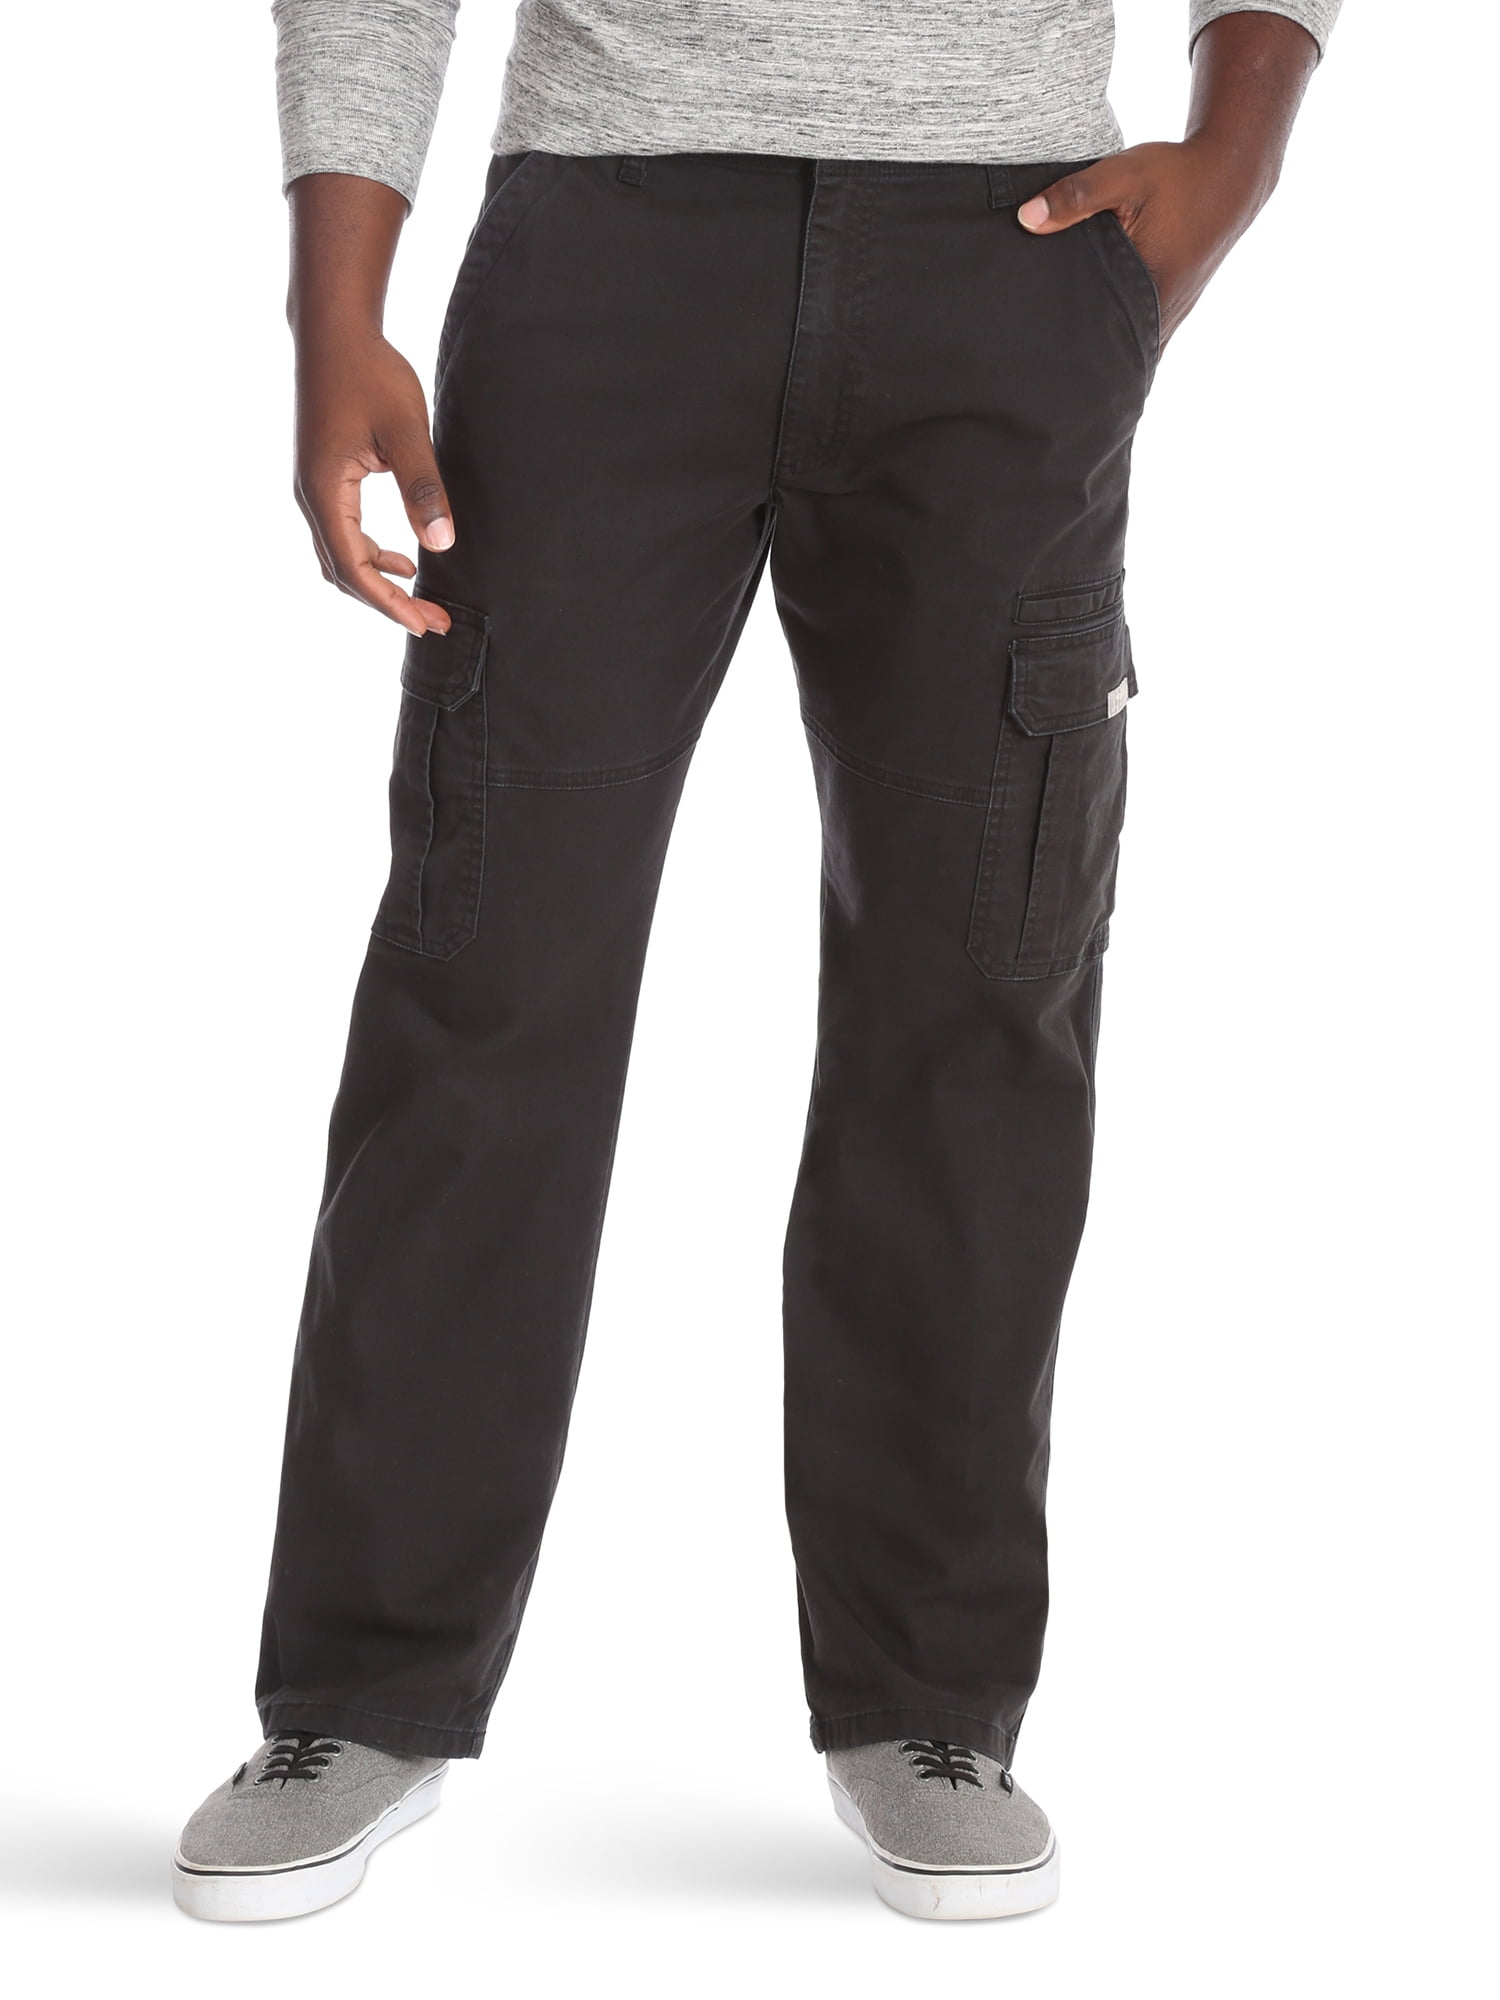 Wrangler Men's and Big Men's Relaxed Fit Cargo Pants with Stretch